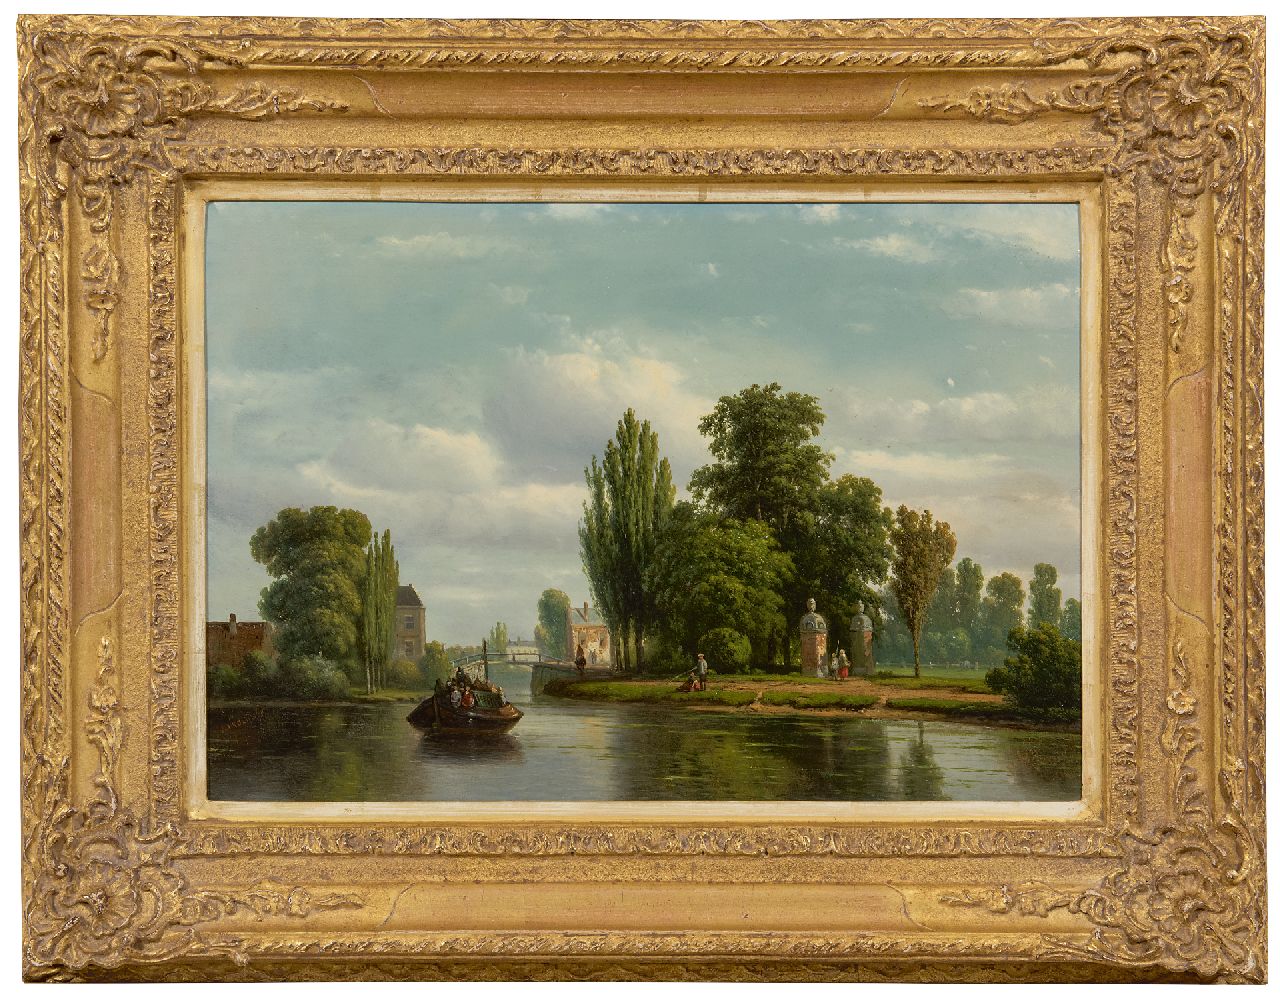 Vrolijk J.A.  | Jacobus 'Adriaan' Vrolijk | Paintings offered for sale | A summer view of the Vecht river, oil on panel 28.5 x 41.0 cm, signed l.l. and dated '58